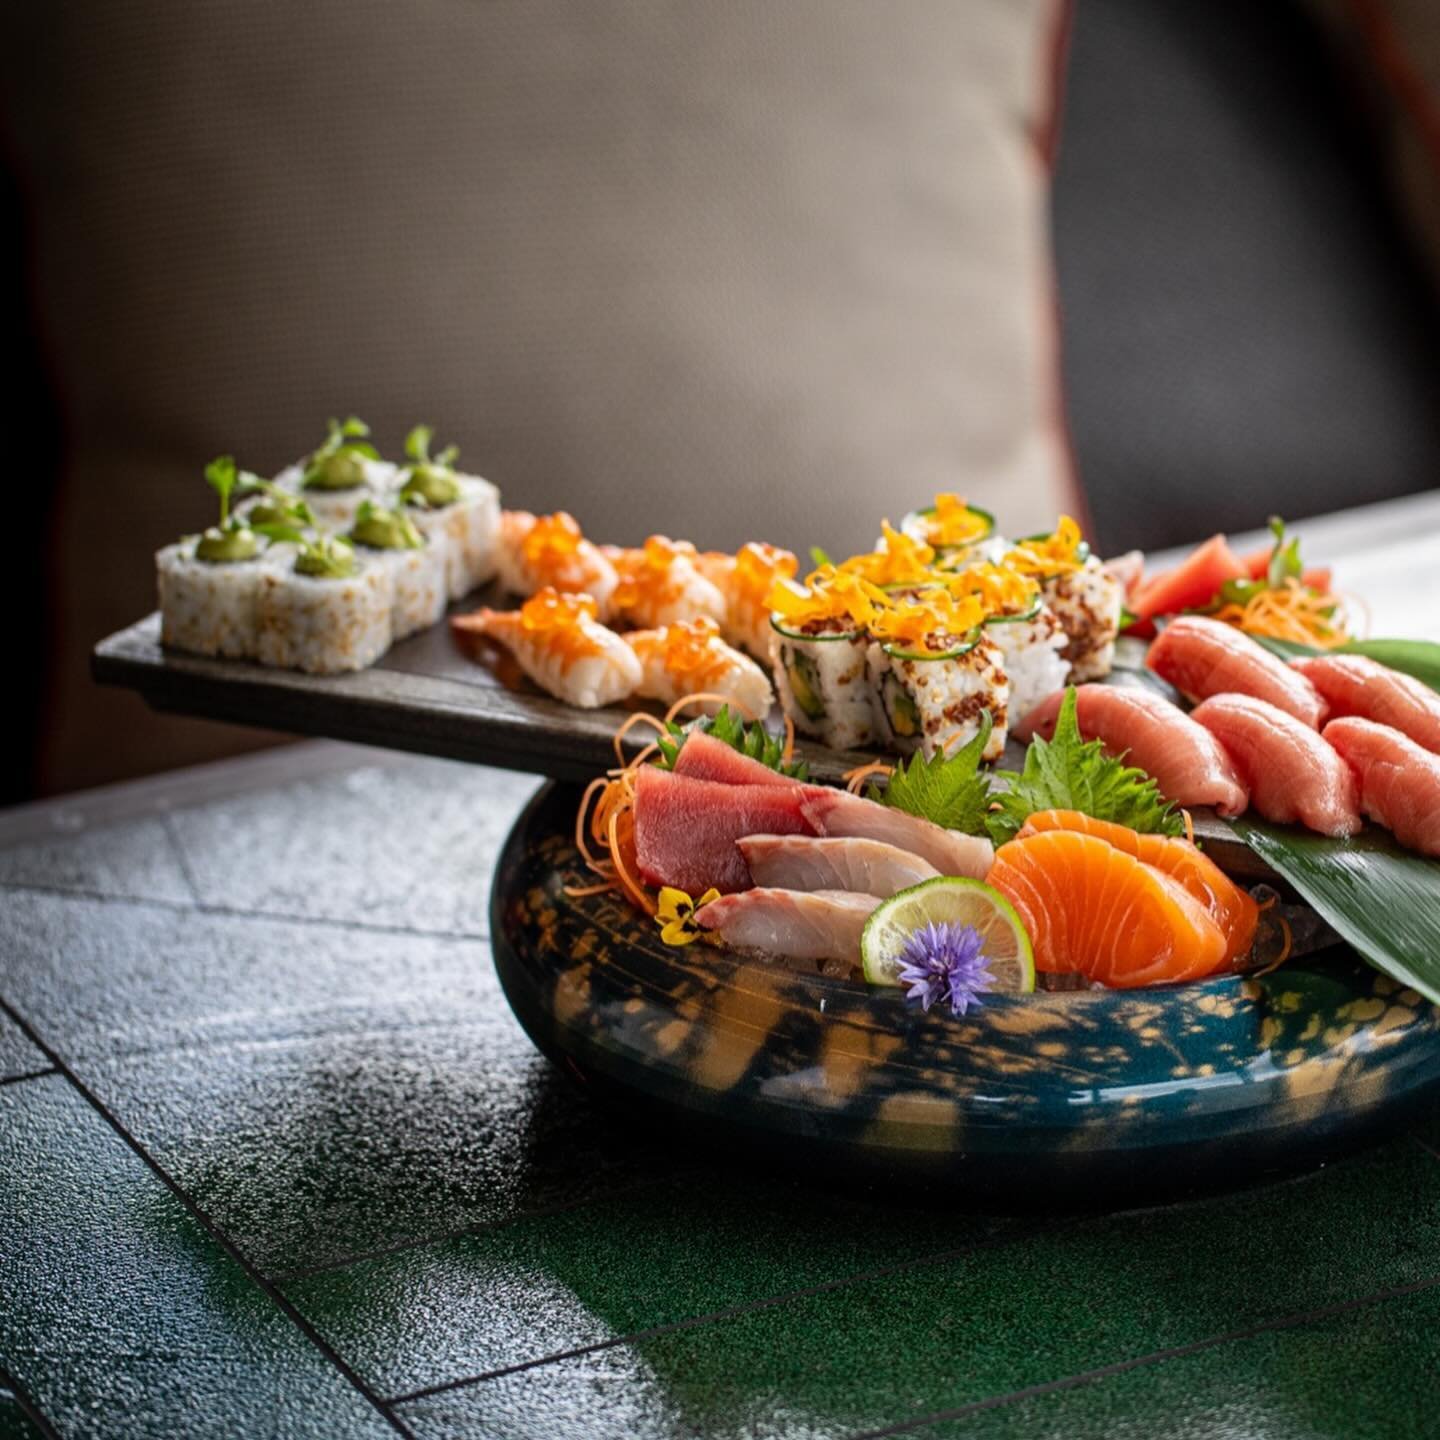 Our menus are live! From the freshest raw seafood in our sushi bar to carefully sourced grilled meats and fish on our robata grill, enjoy all your favourites and new additions at Los Mochis London City. 

Book your table via the link in our bio.